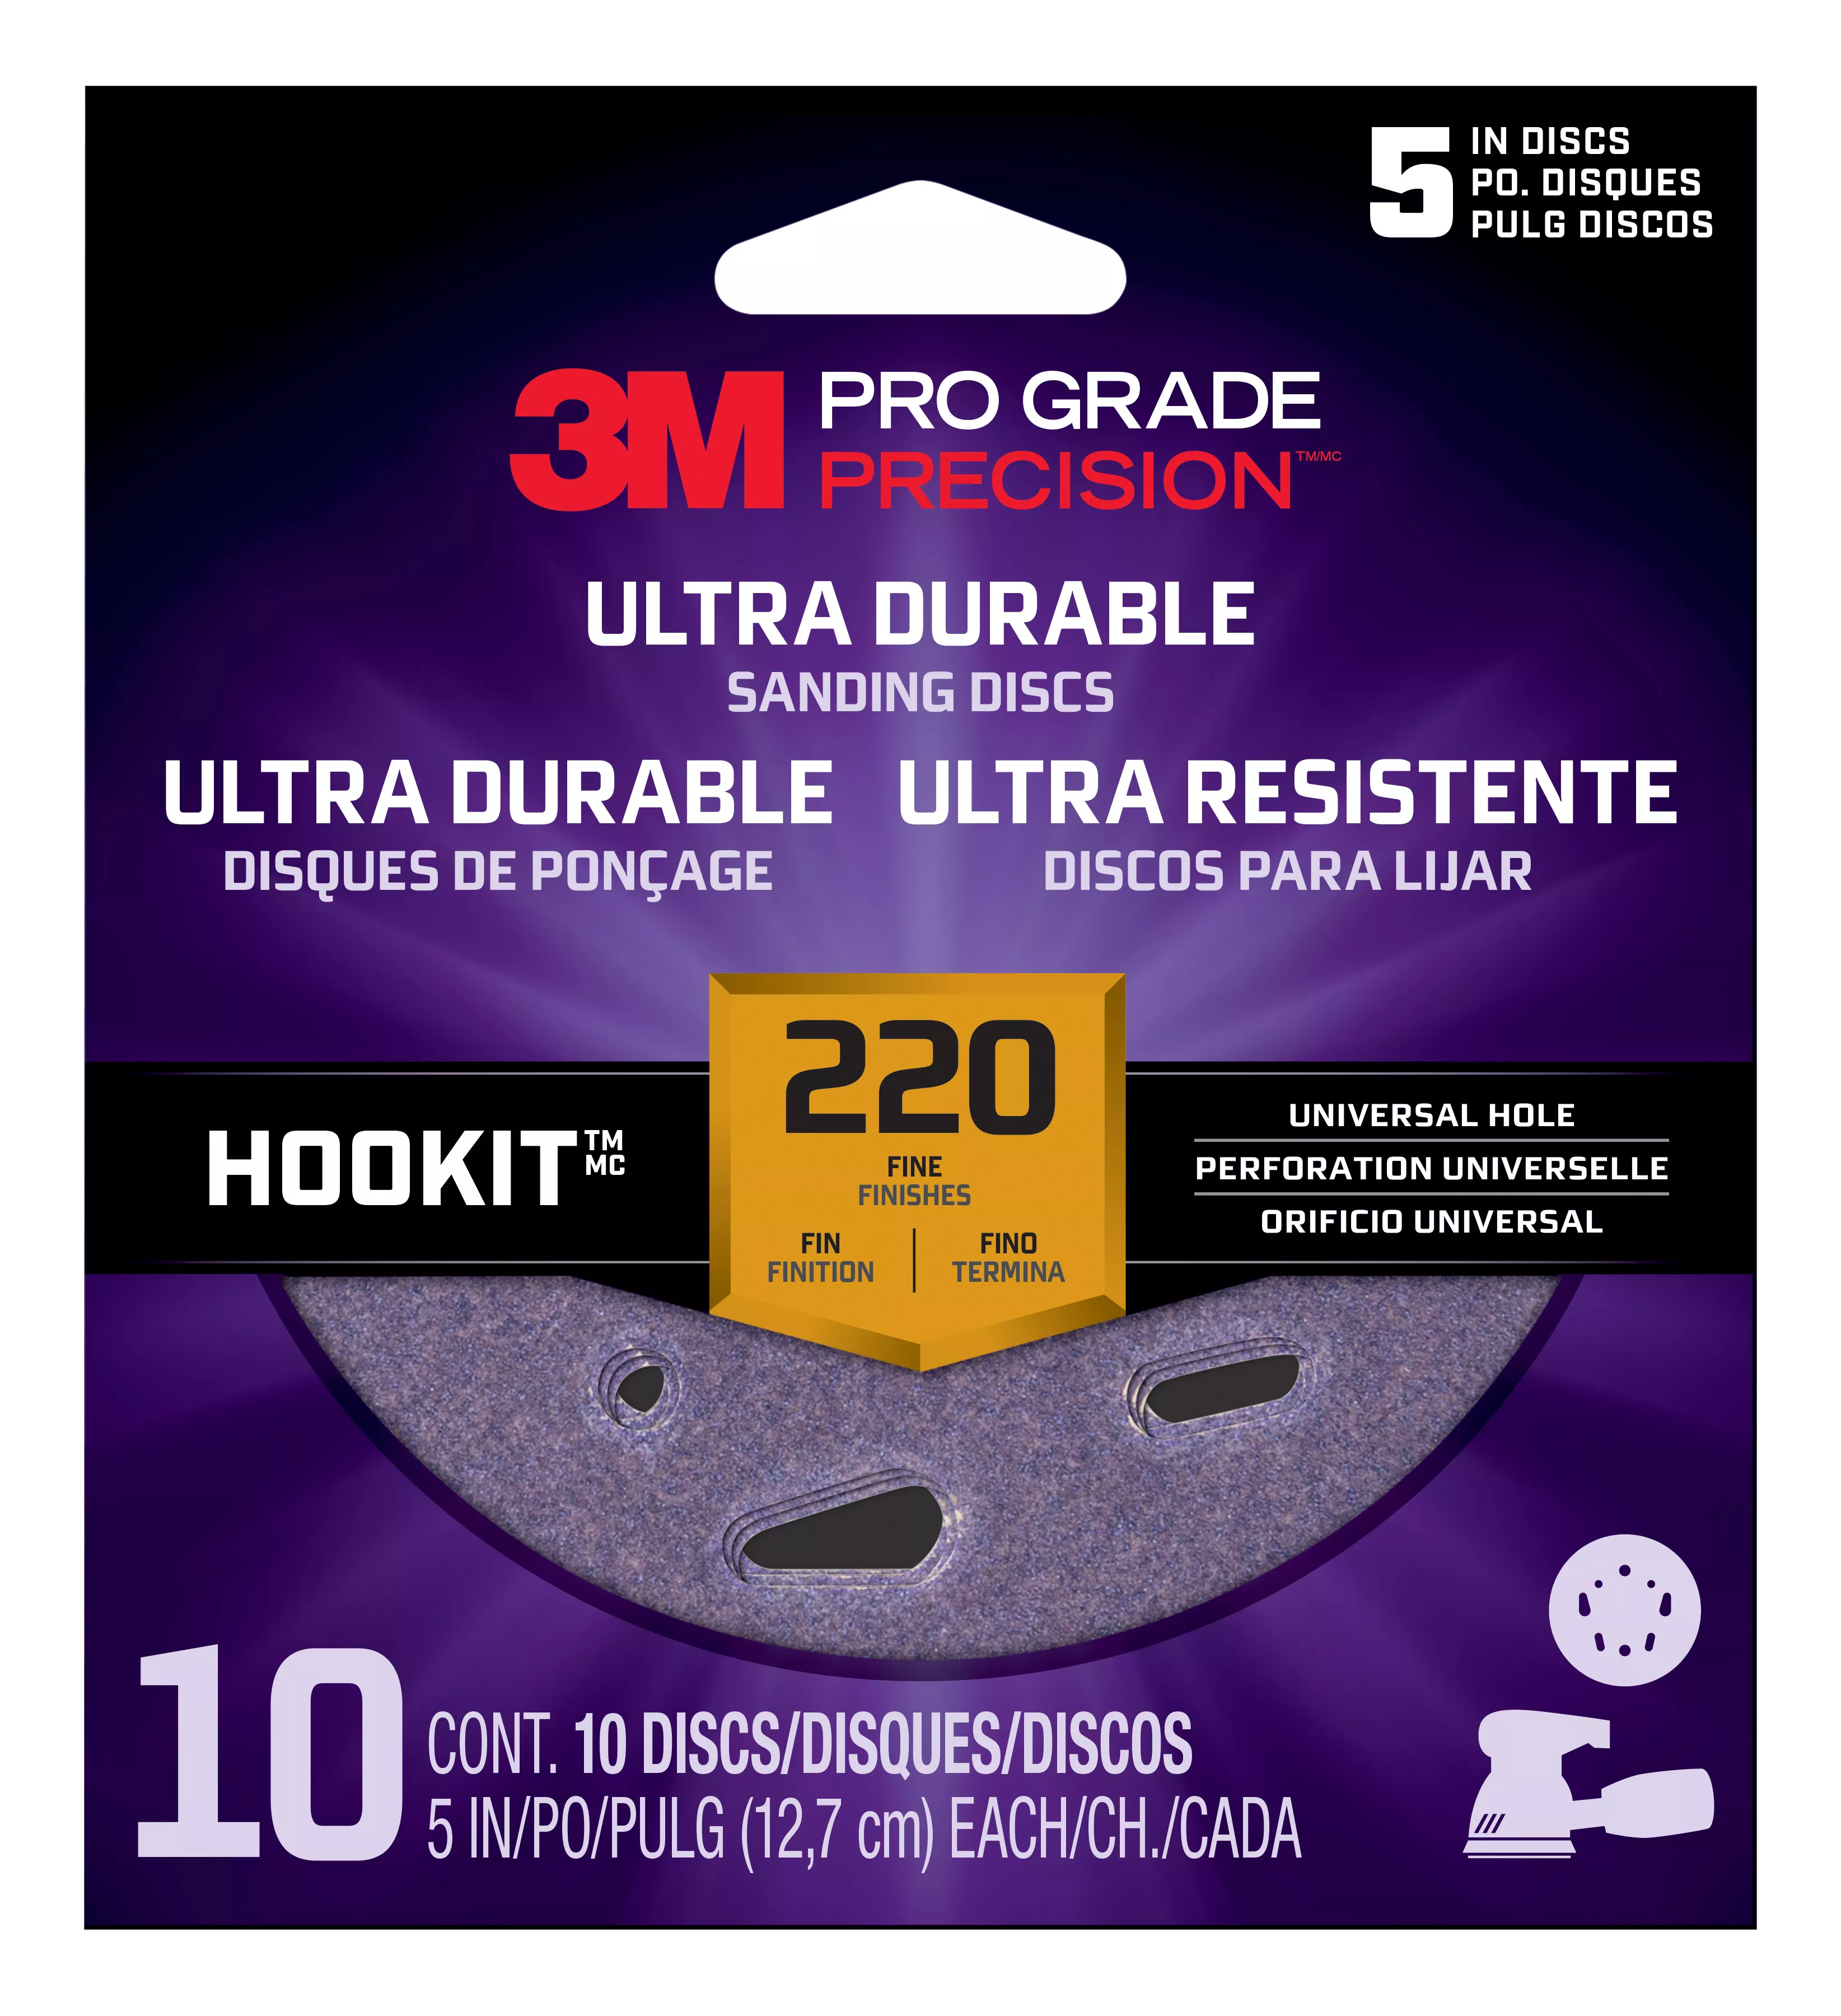 3M™ Pro Grade Precision™ Ultra Durable Universal Hole Sanding Disc
DUH5220TRI-10I, 5 inch UH, 220, 10/pack